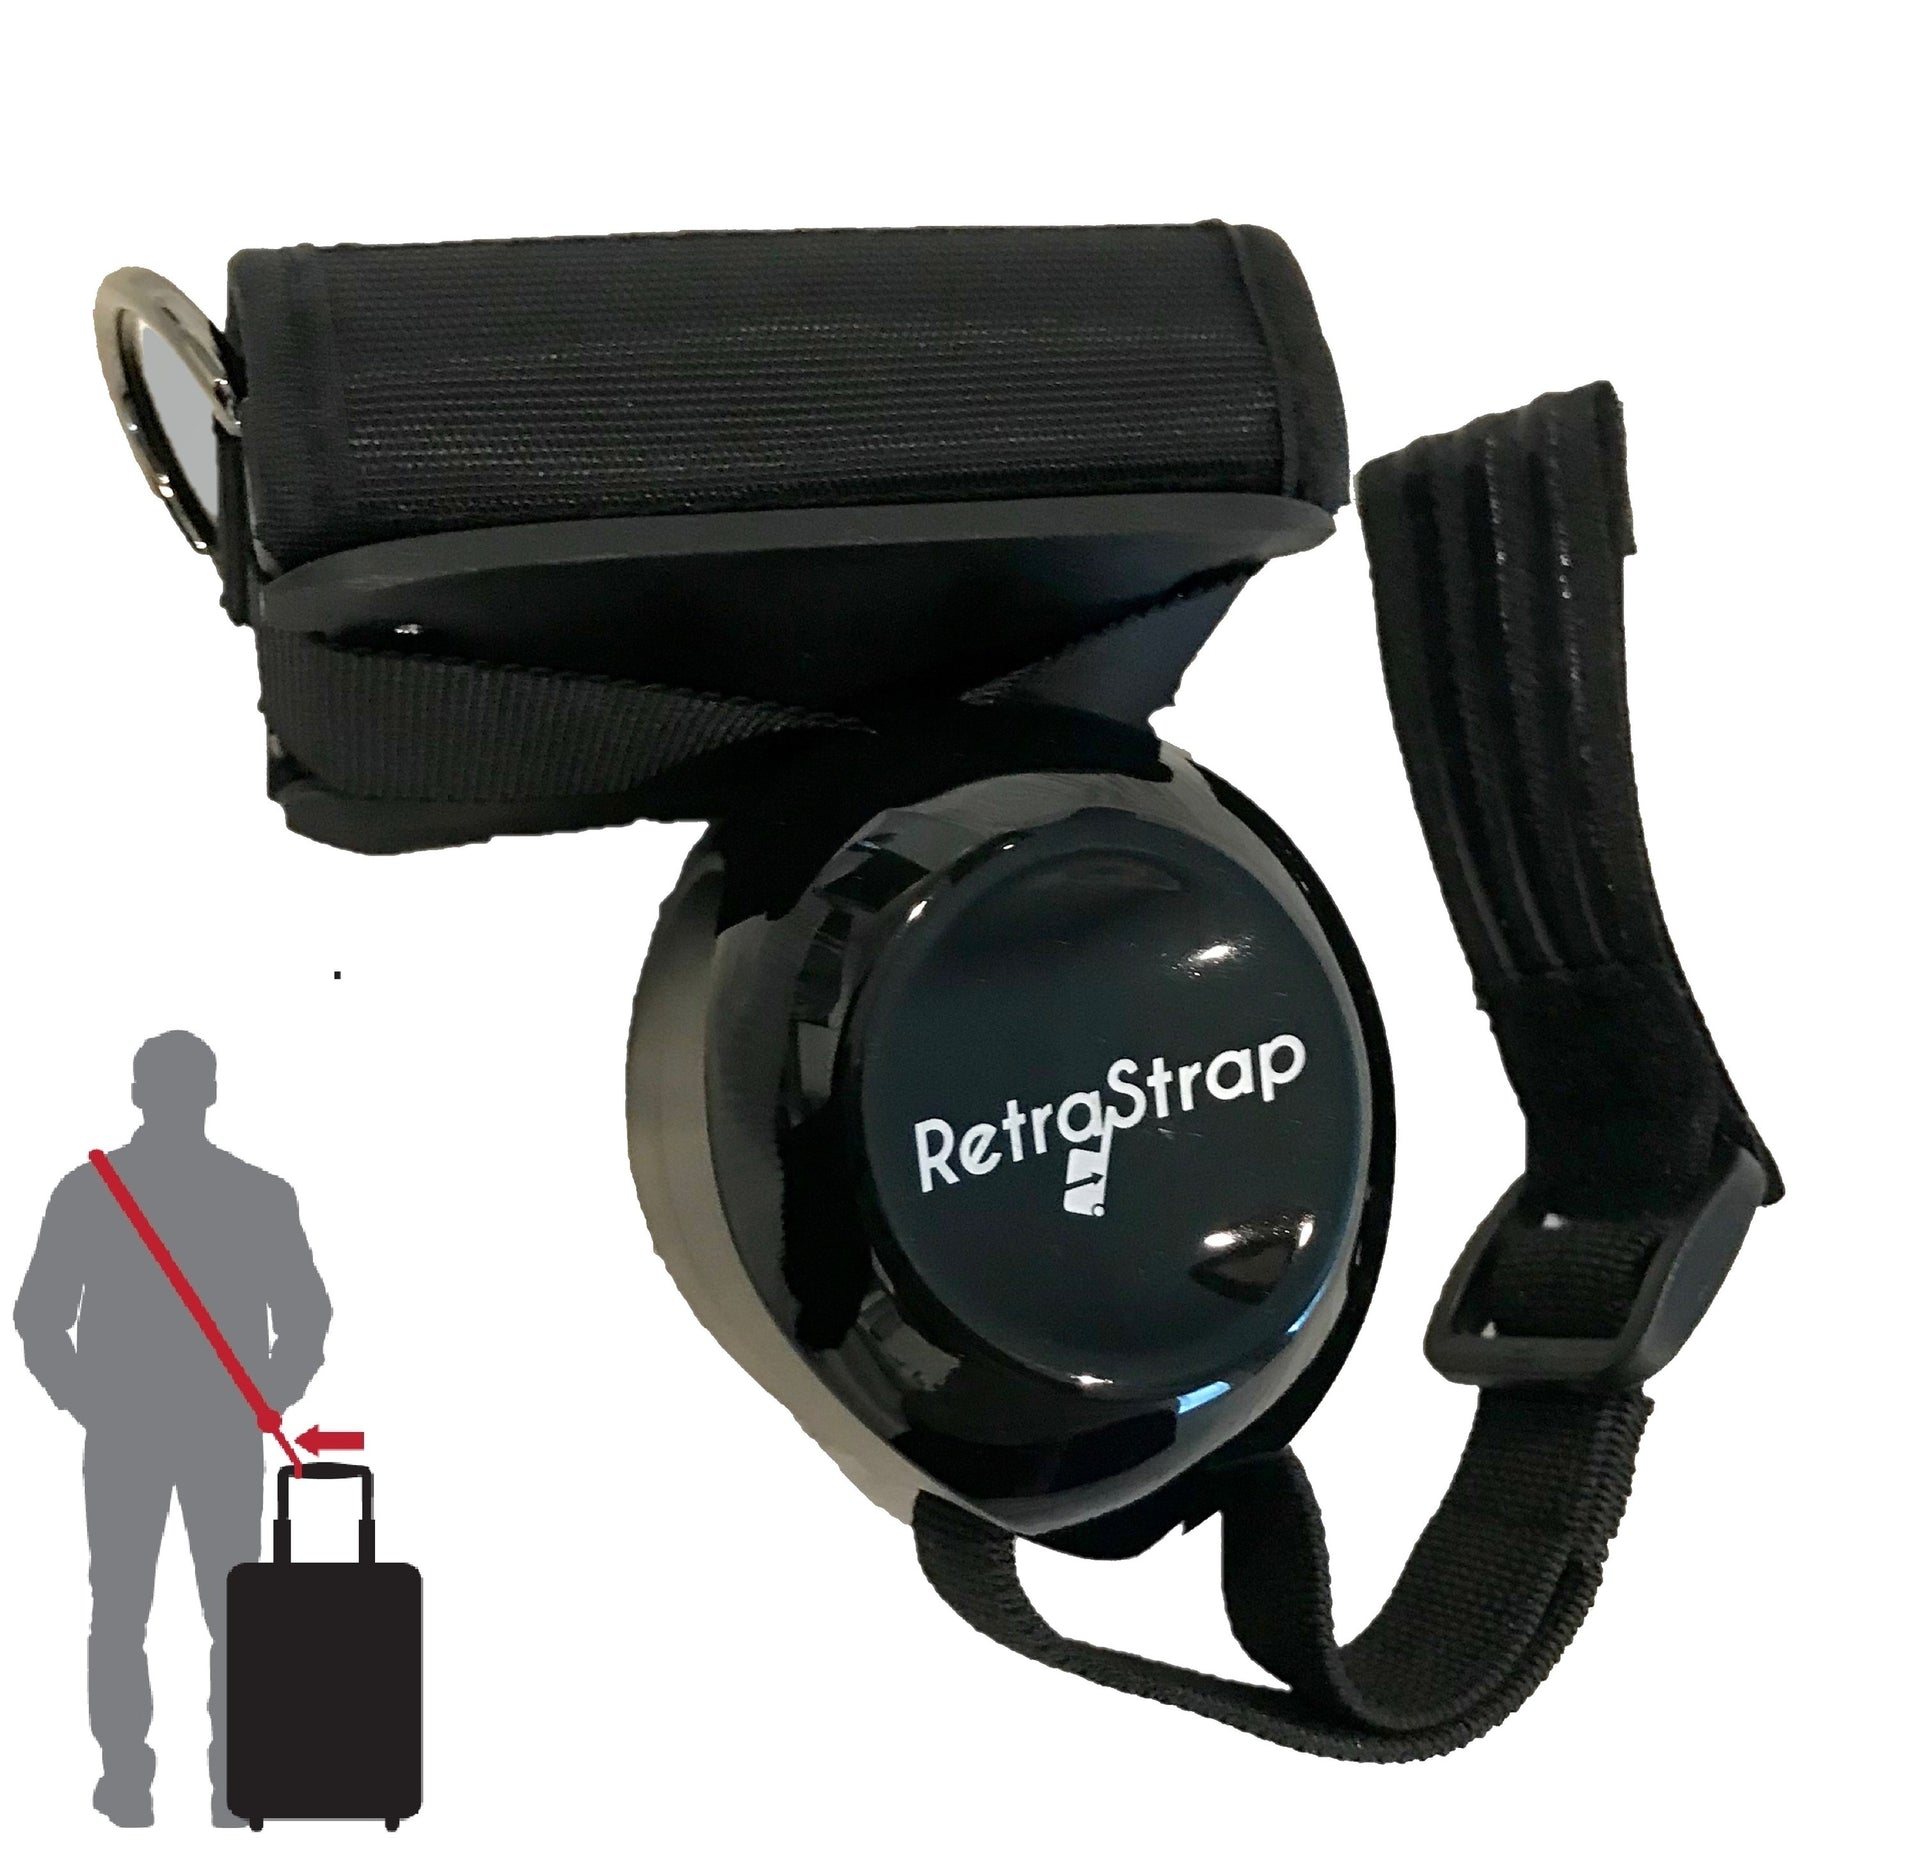 (U.S.) RetraStrap Hands Free your carry-on luggage - Anti theft. - Mercantile Mountain